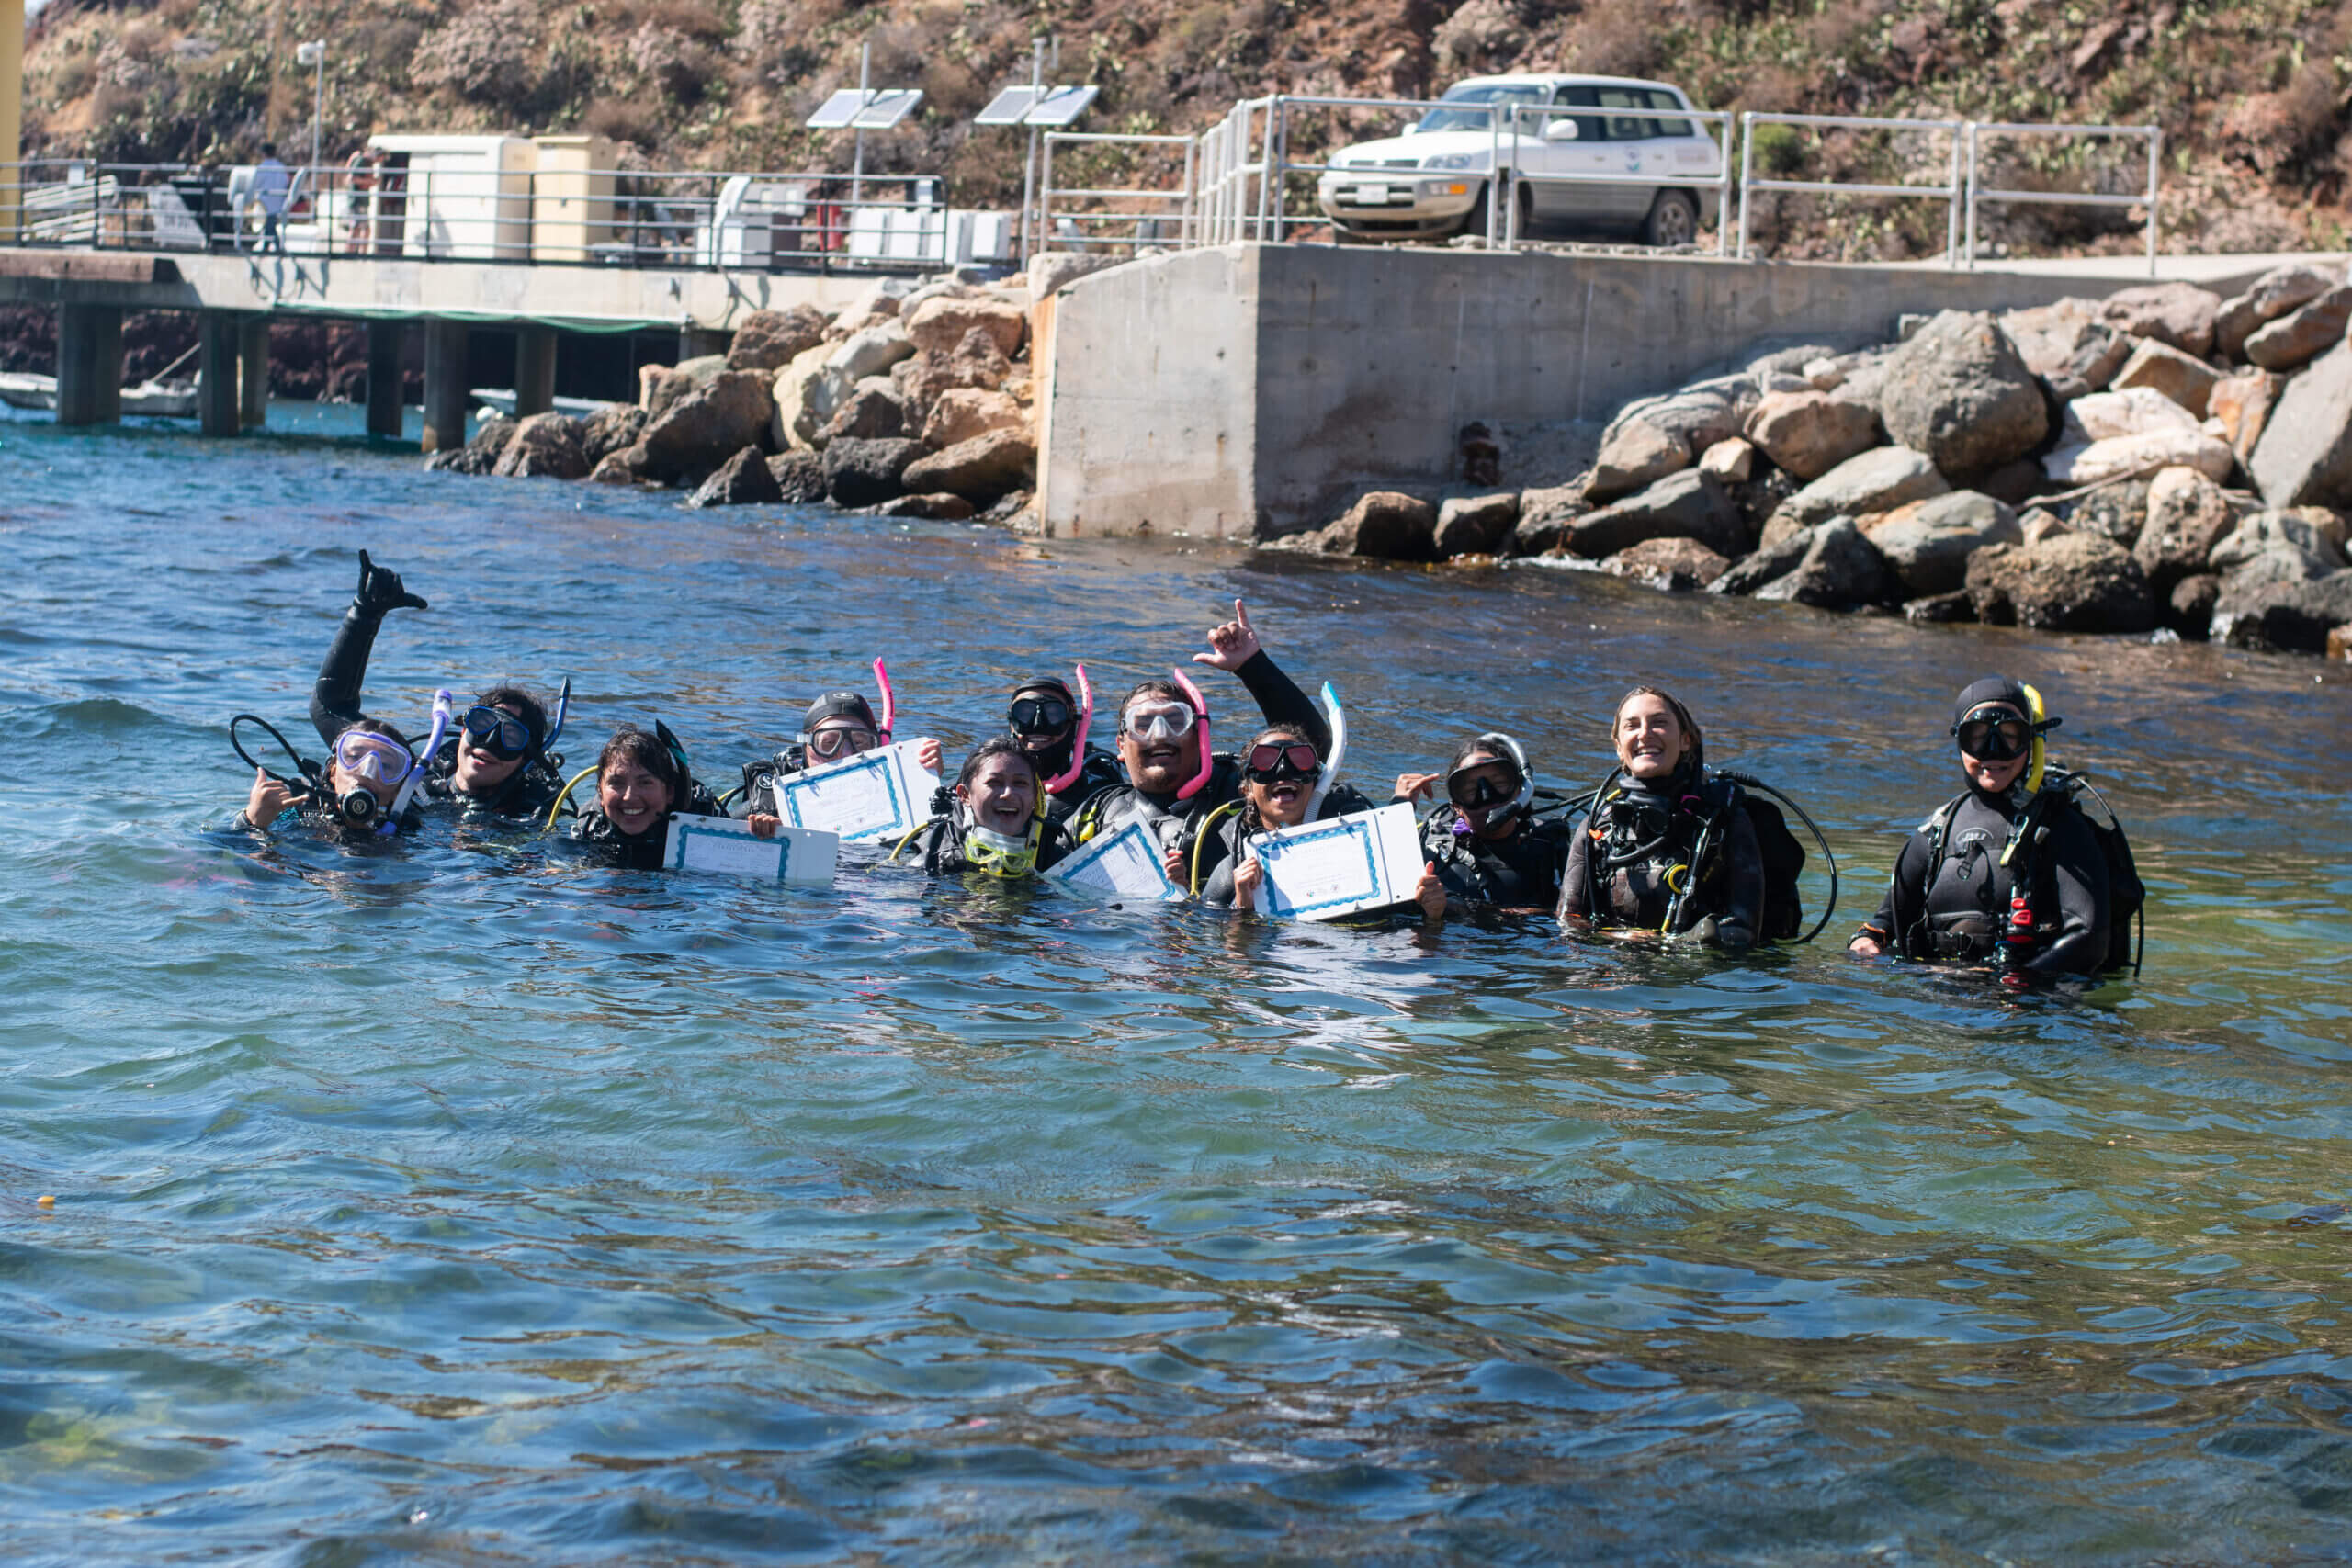 Workshop participants around a small pool containing a remotely operated vehicle.